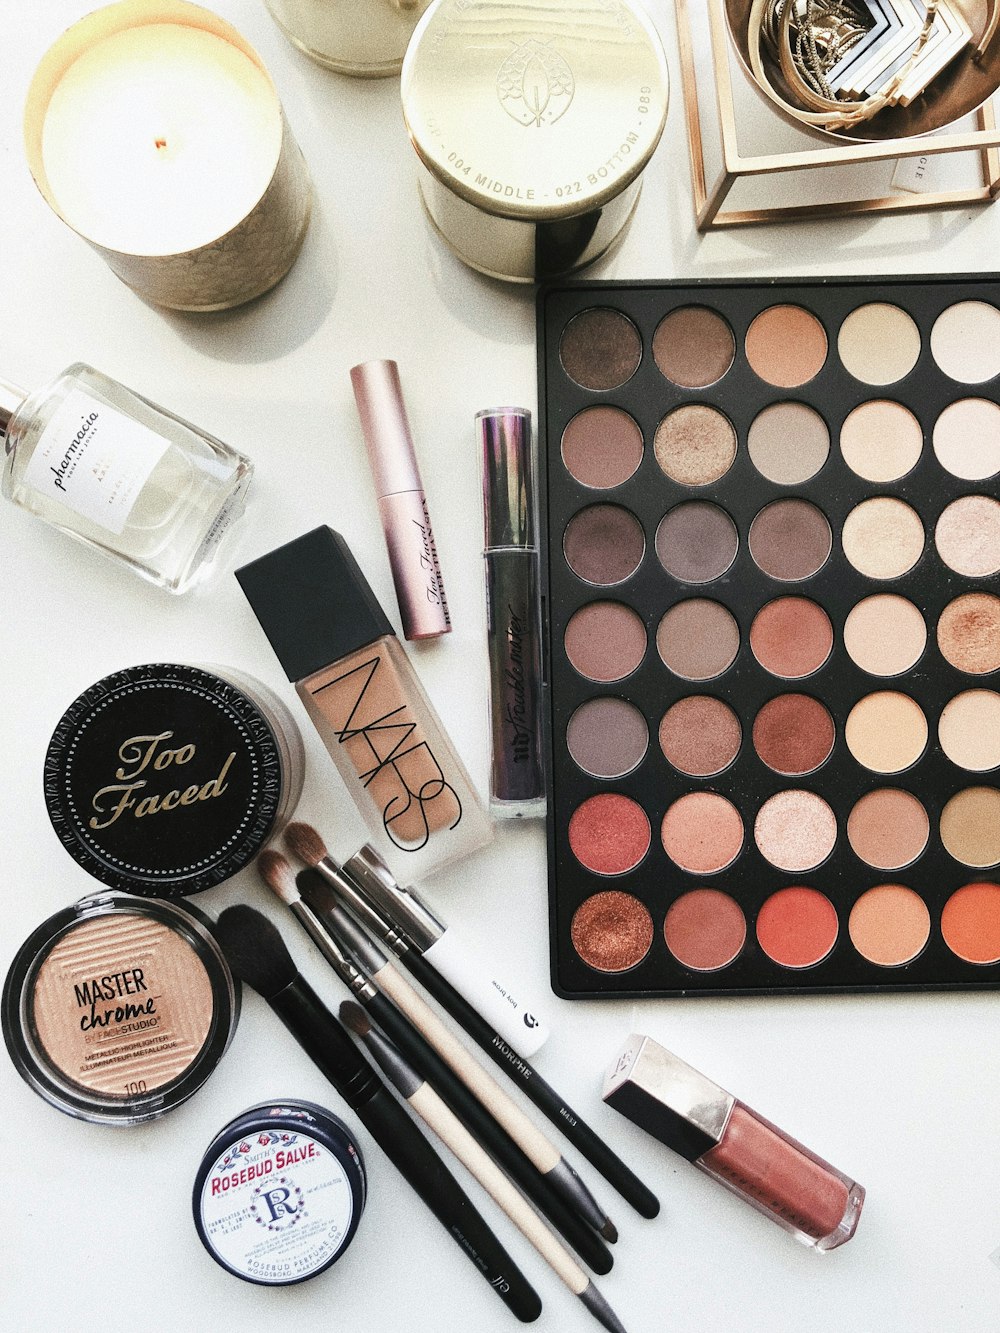 500+ Makeup Pictures [HD] | Download Free Images on Unsplash